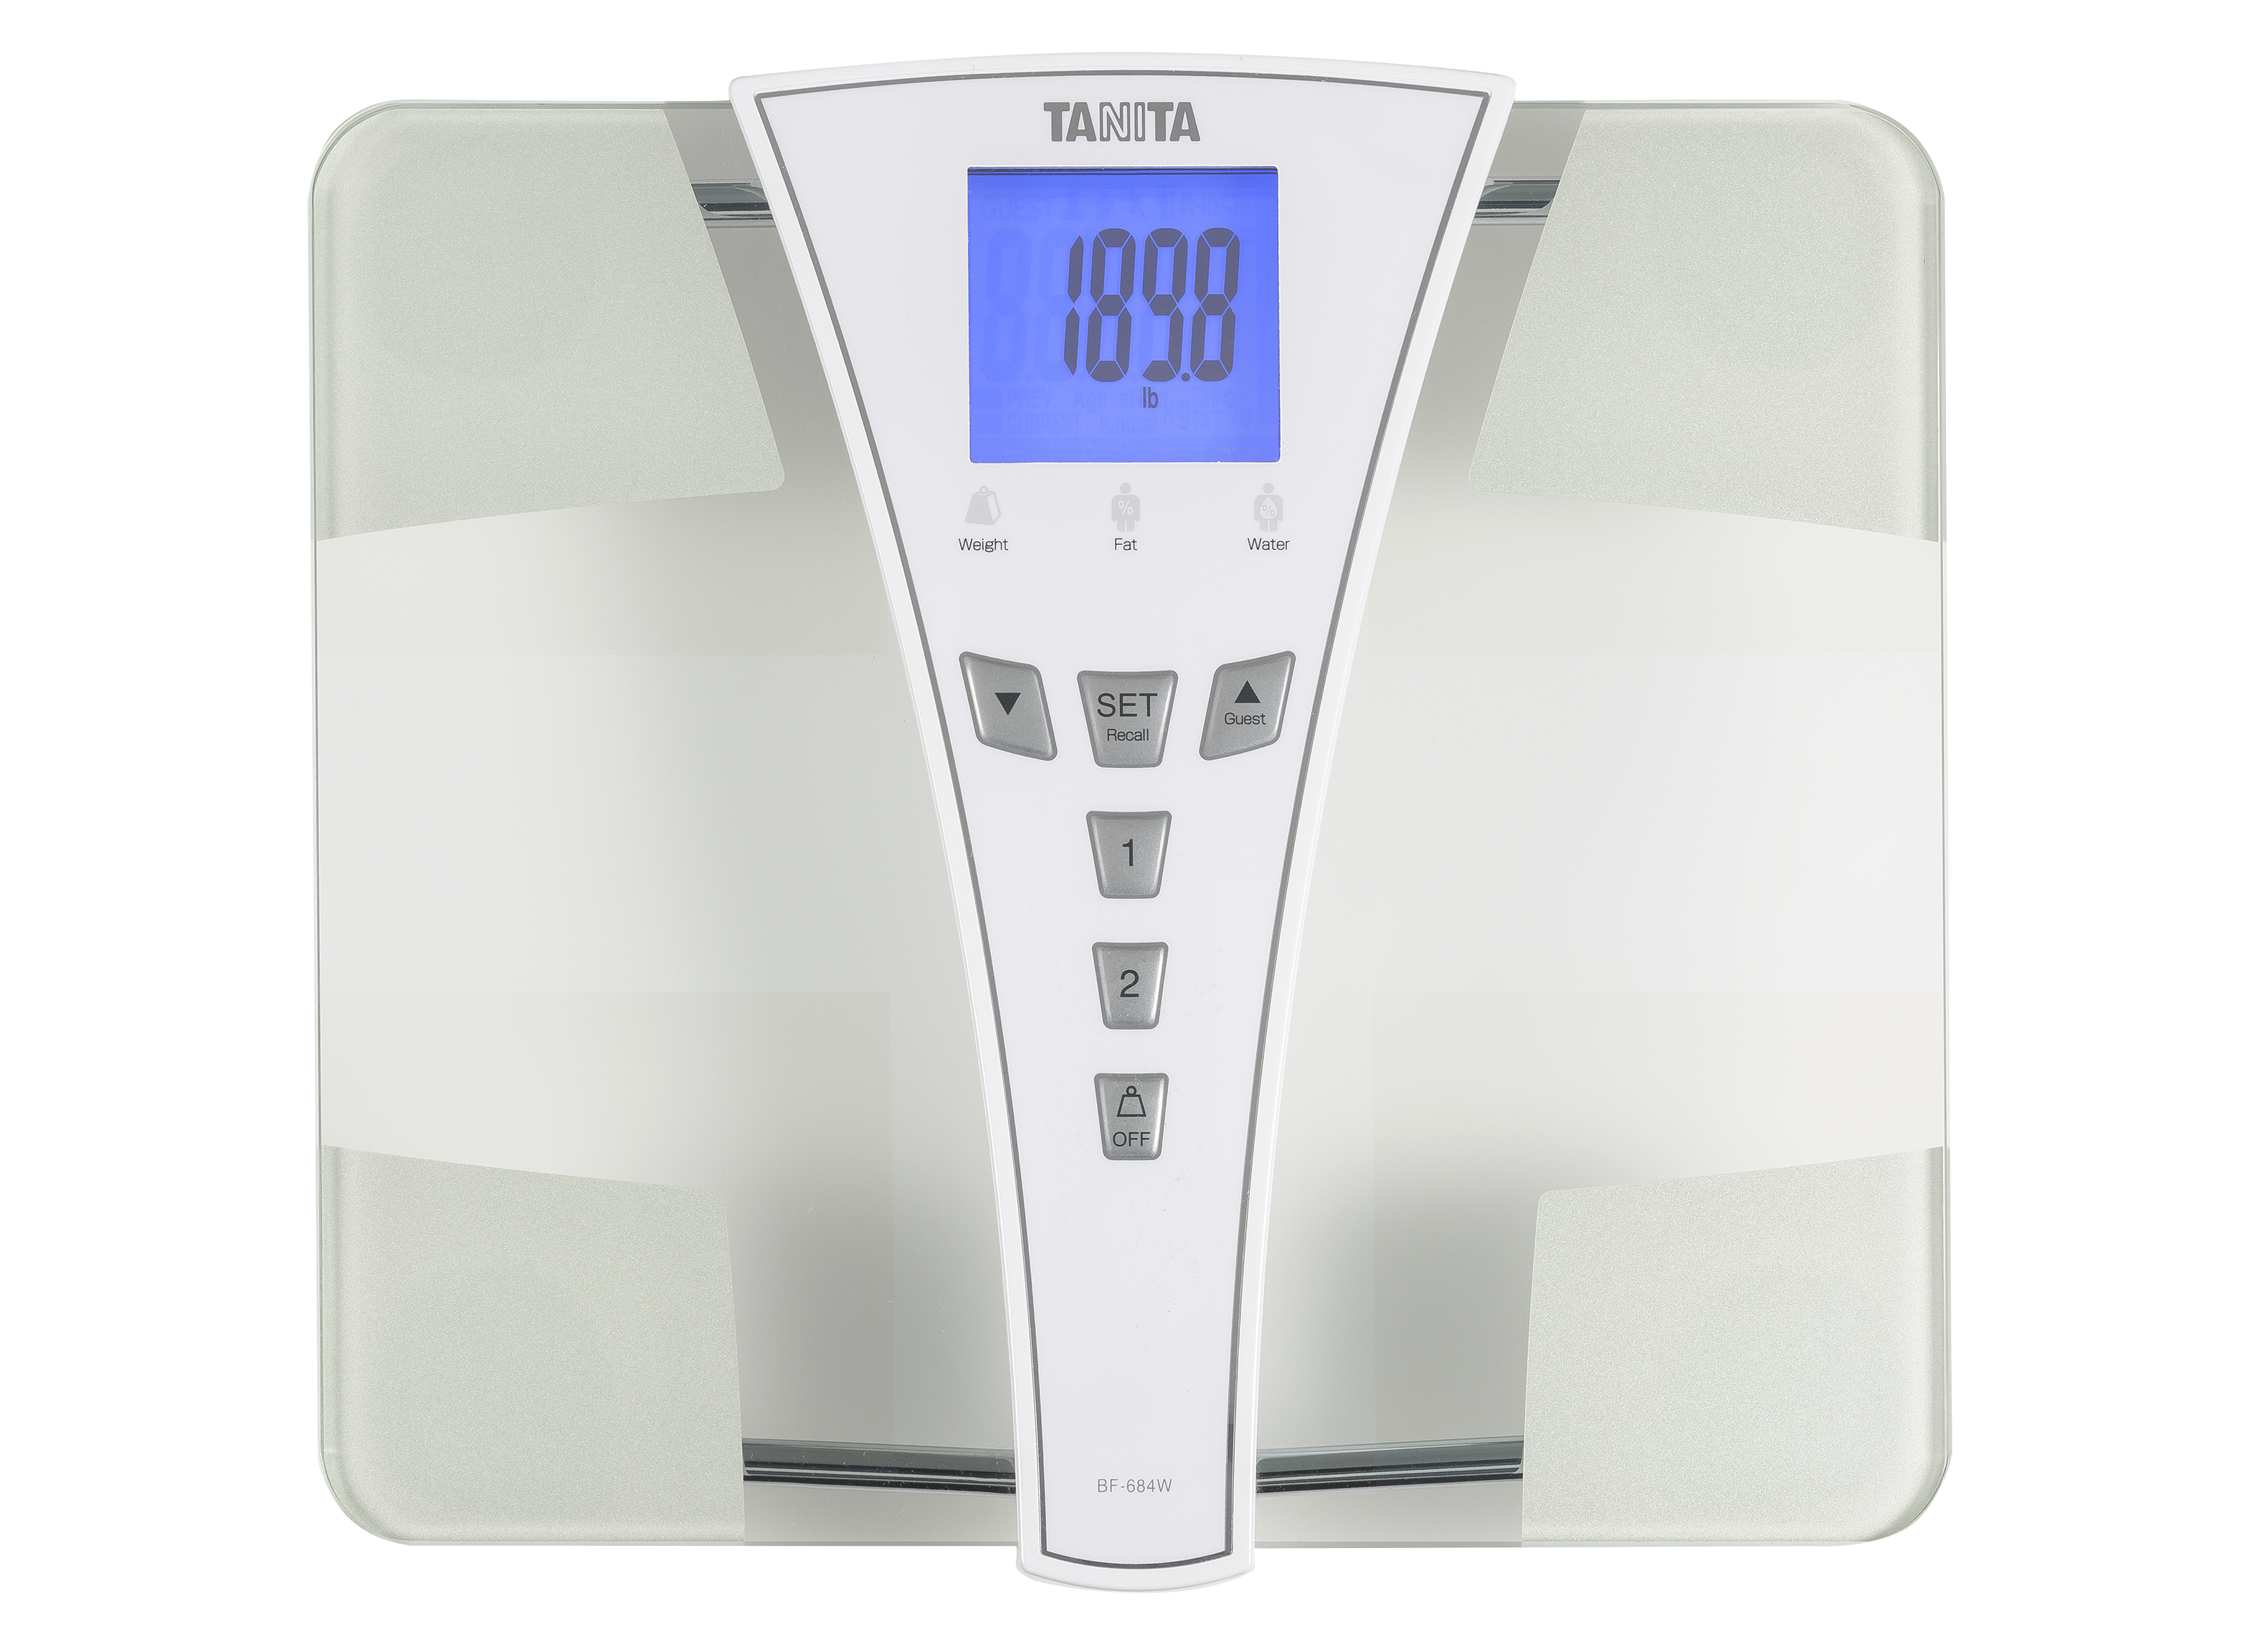 https://crdms.images.consumerreports.org/prod/products/cr/models/384613-bathroomscales-tanita-bf684w.png